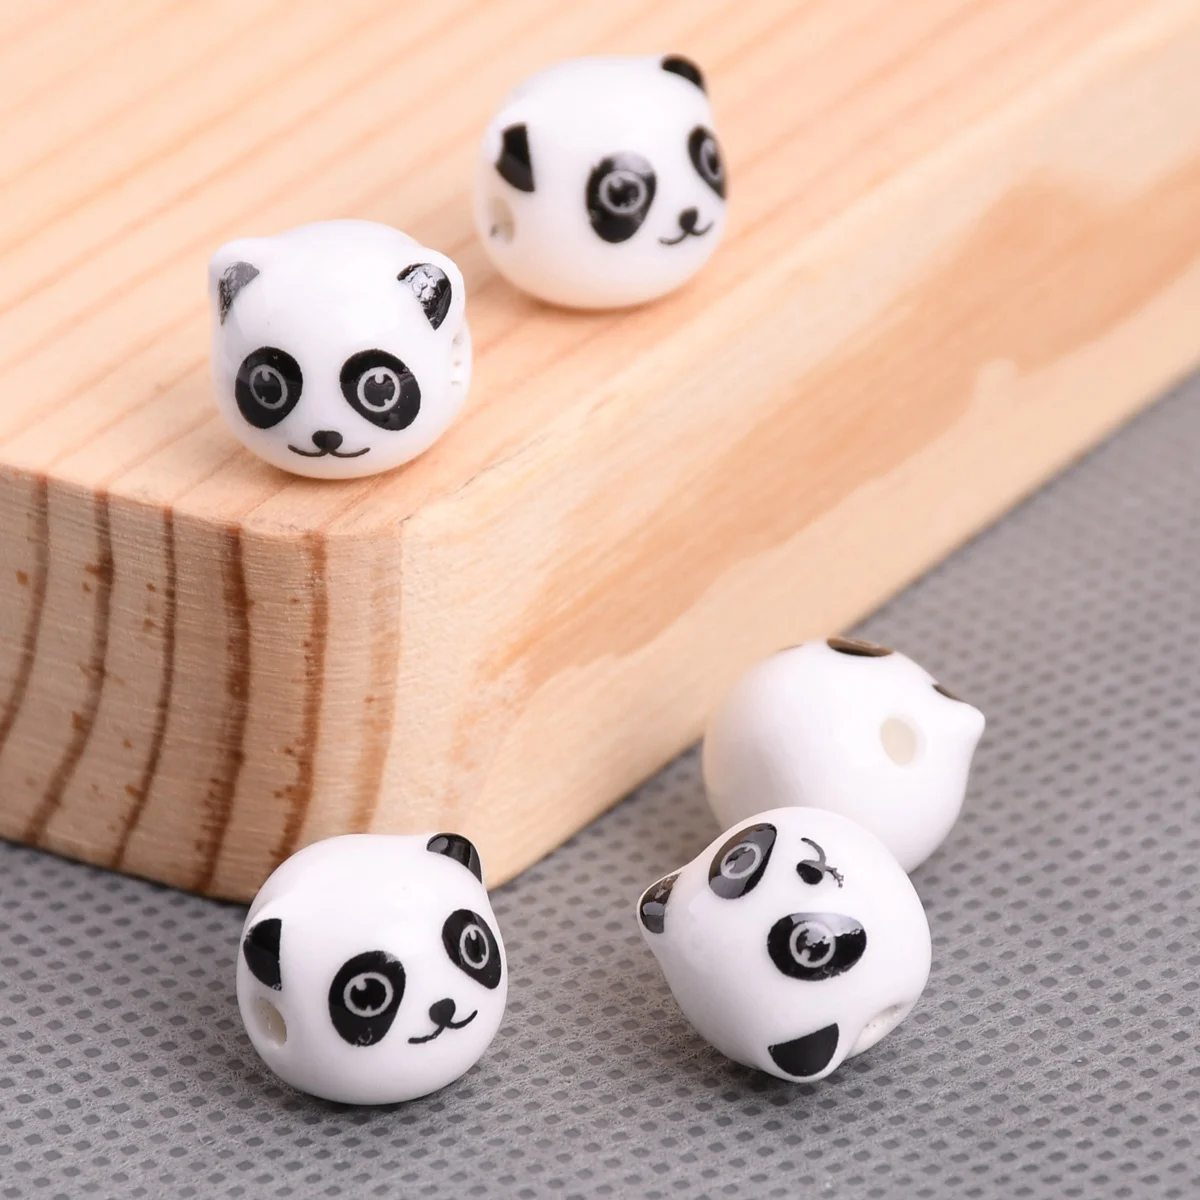 10pcs Panda Head 11mm Handmade Ceramic Porcelain Loose Beads For Jewelry Making DIY Bracelet Findings evil eye jewelry tray dish holder soap plate eye of the devil storage tray ceramic buddhist hand display tray for candle key